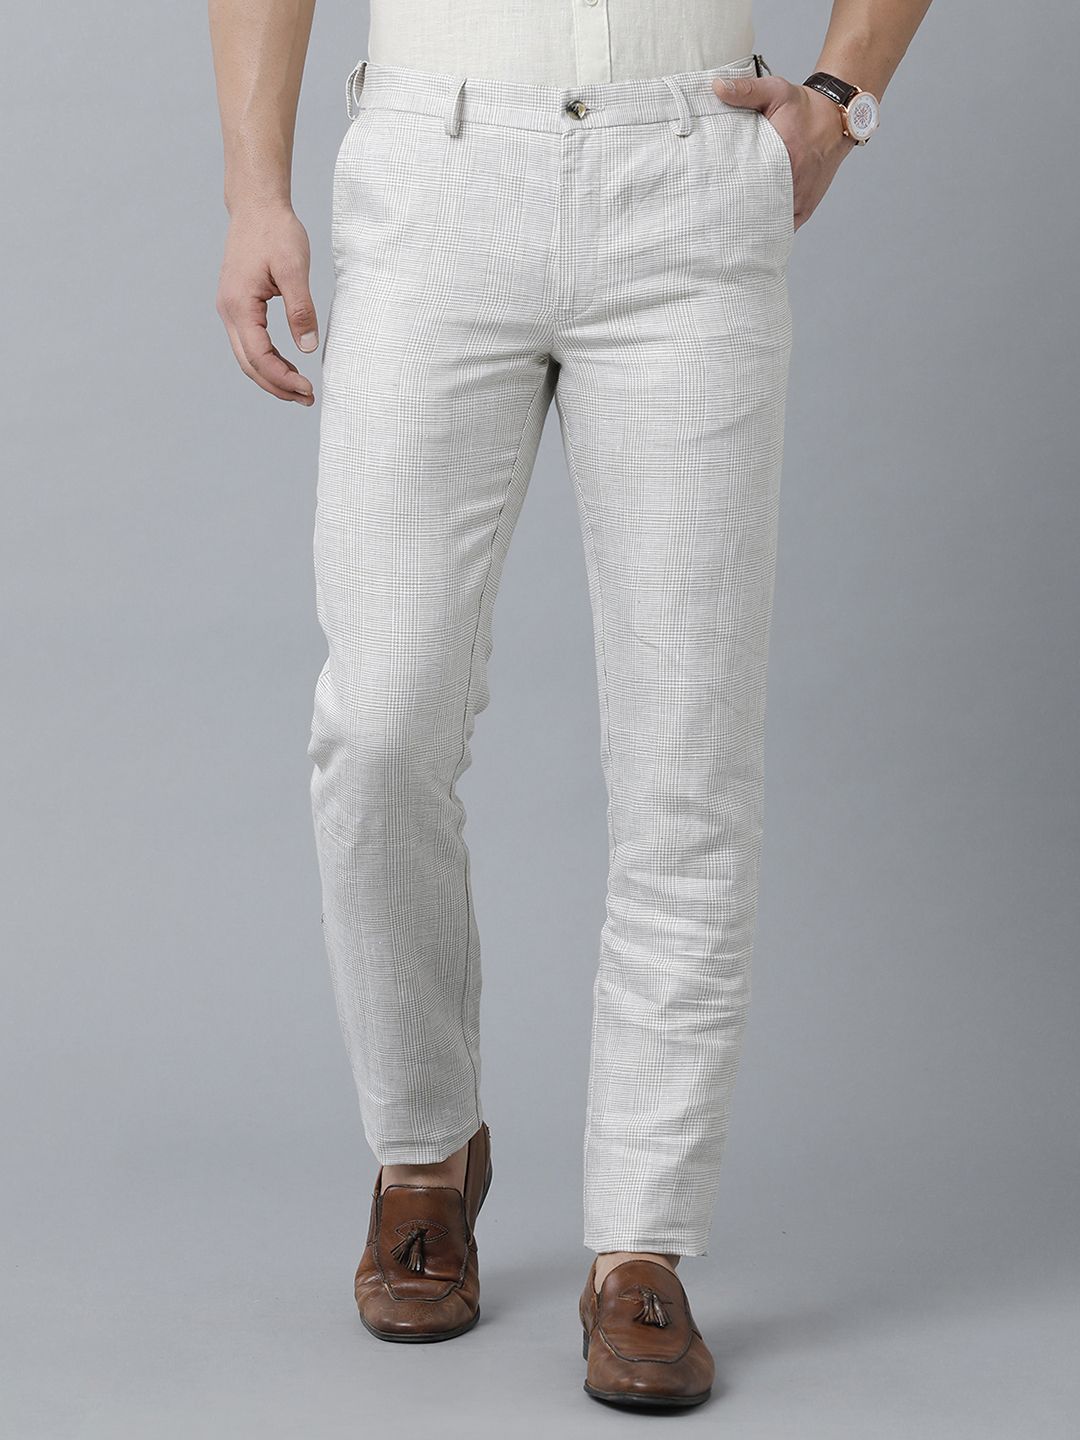 Discover 73+ mens grey linen trousers - in.cdgdbentre